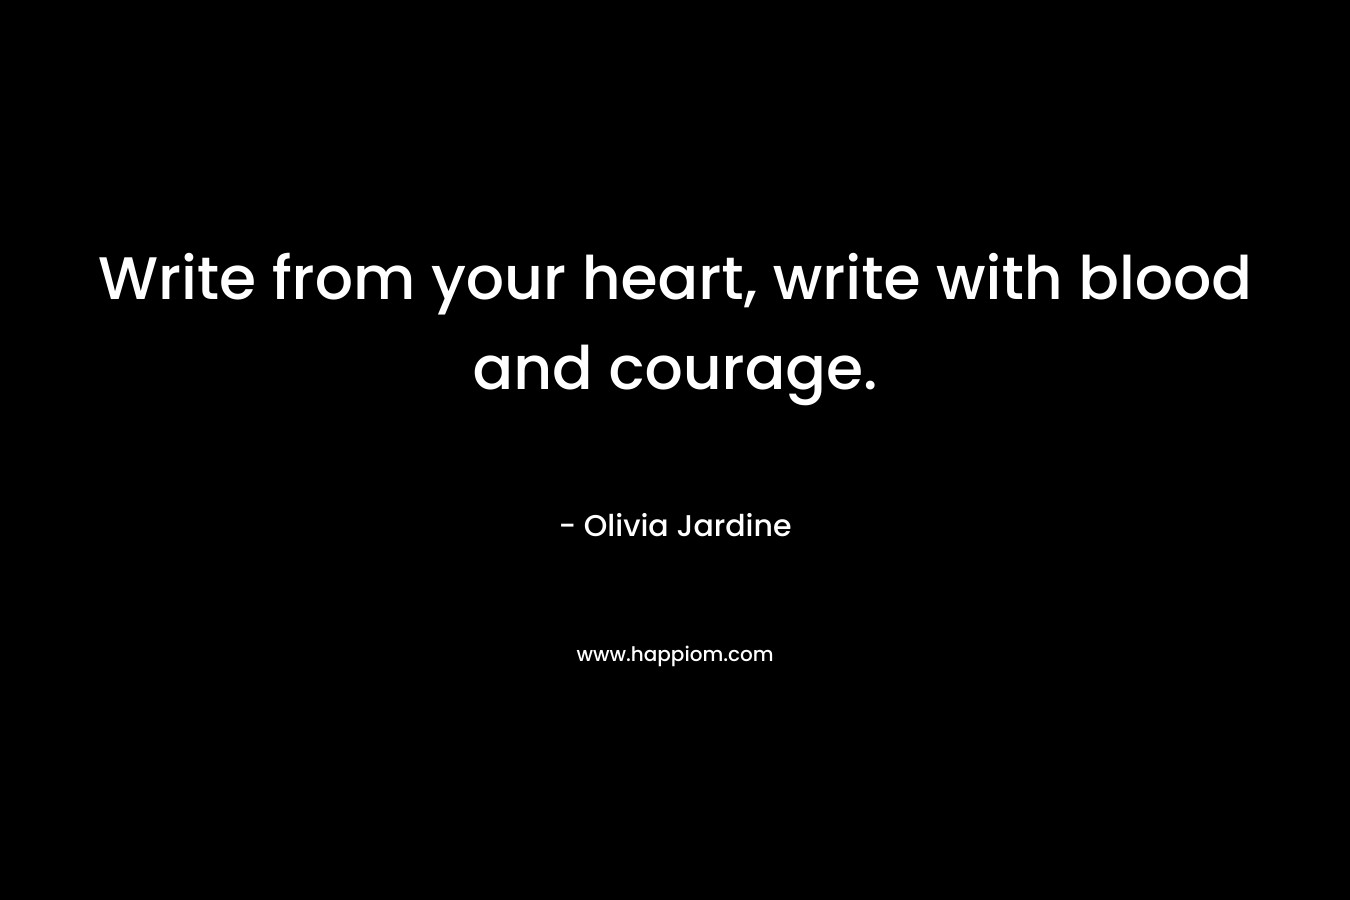 Write from your heart, write with blood and courage.